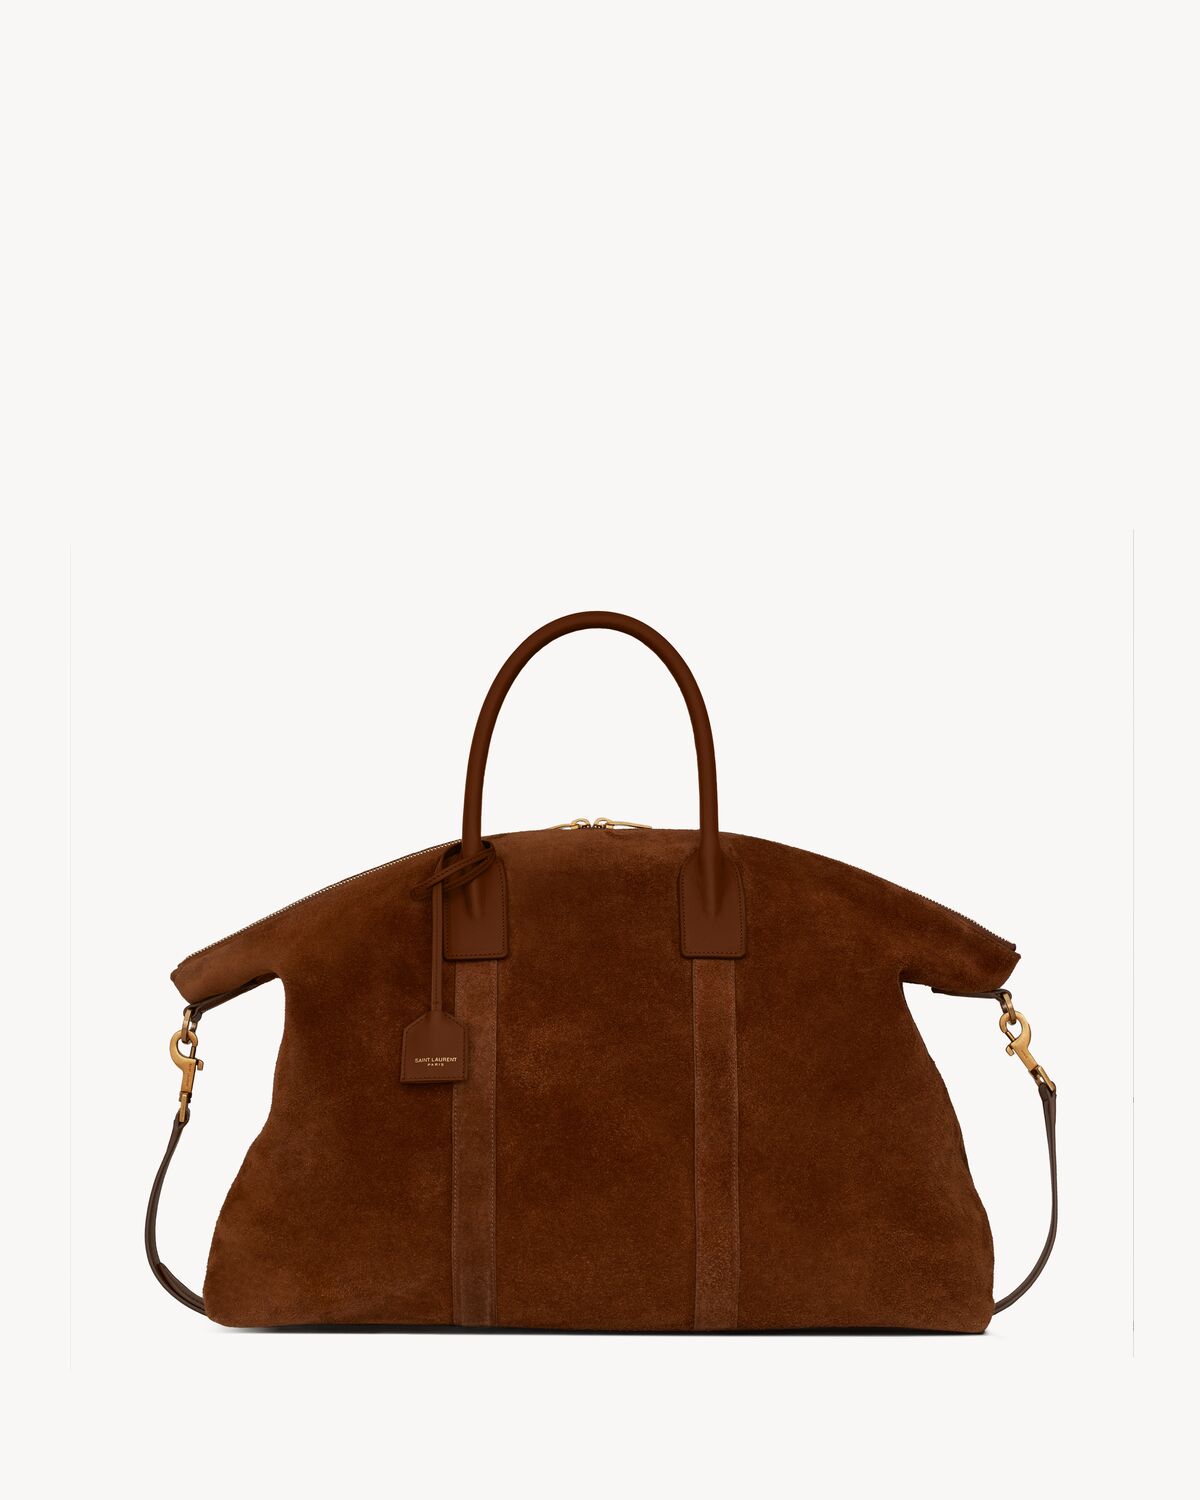 GIANT BOWLING bag in suede